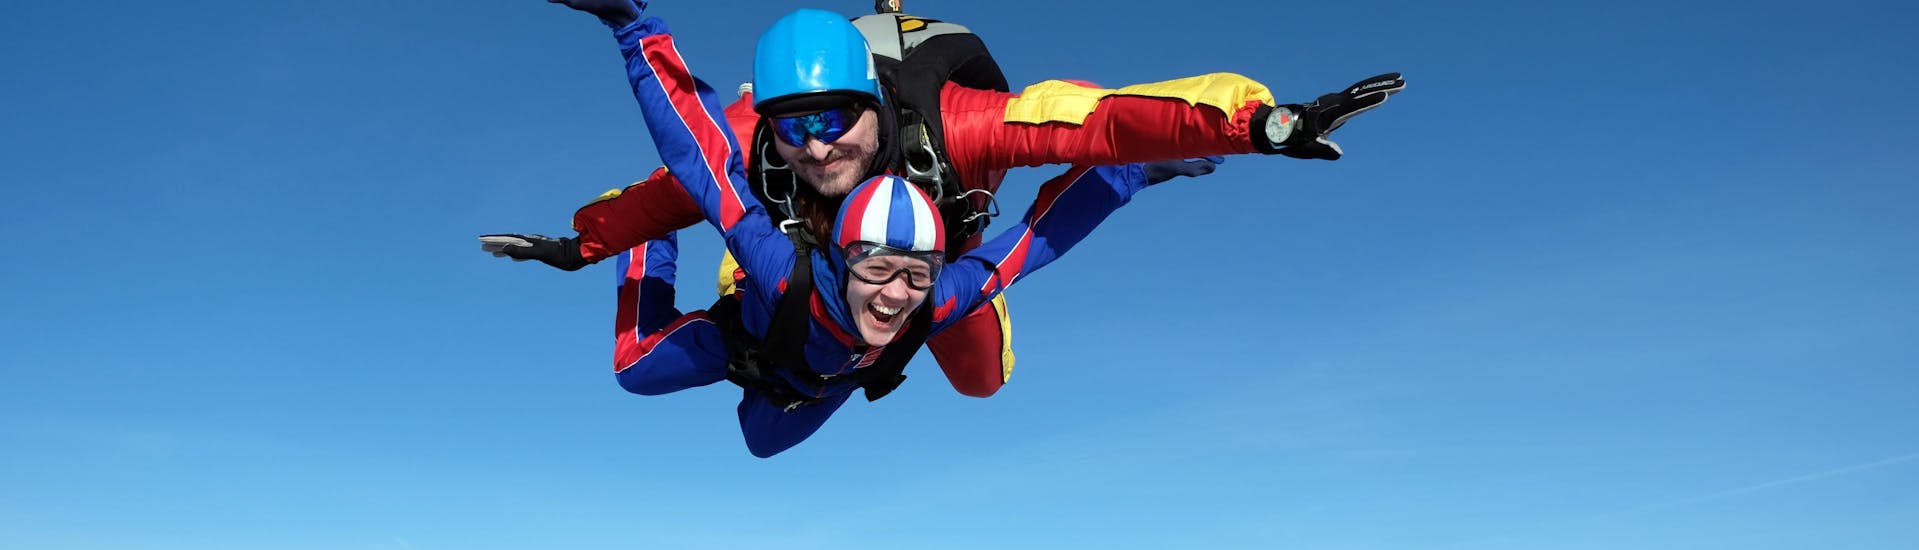 Woman full of excitement while tandem skydiving